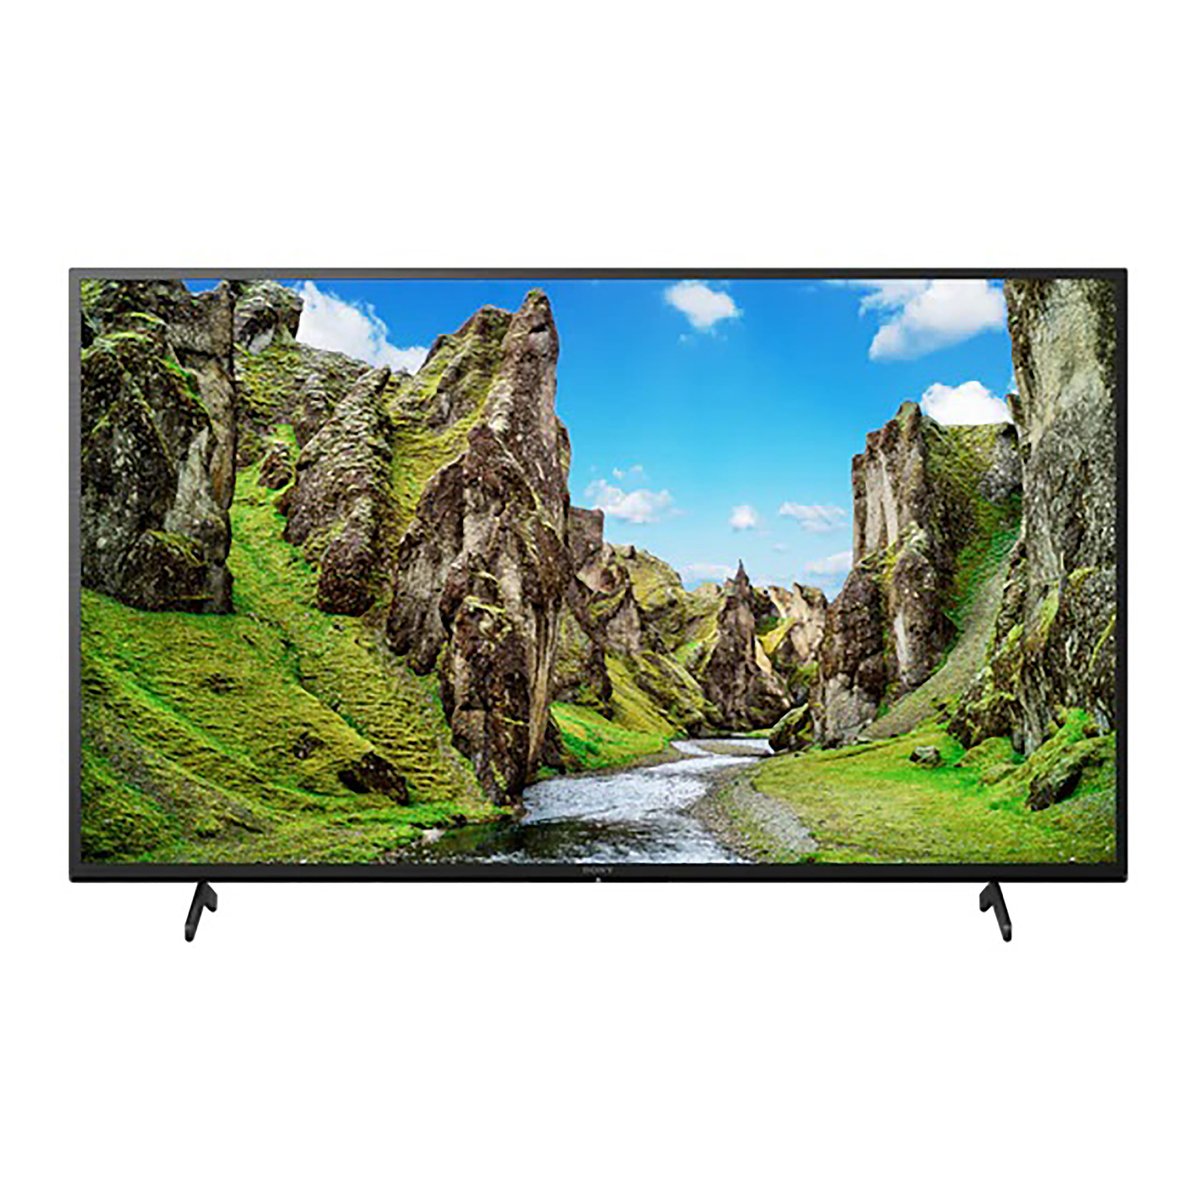 Sony 4K UHD Android Smart LED TV KD-43X75 43 inch Online at Best Price, LED  TV